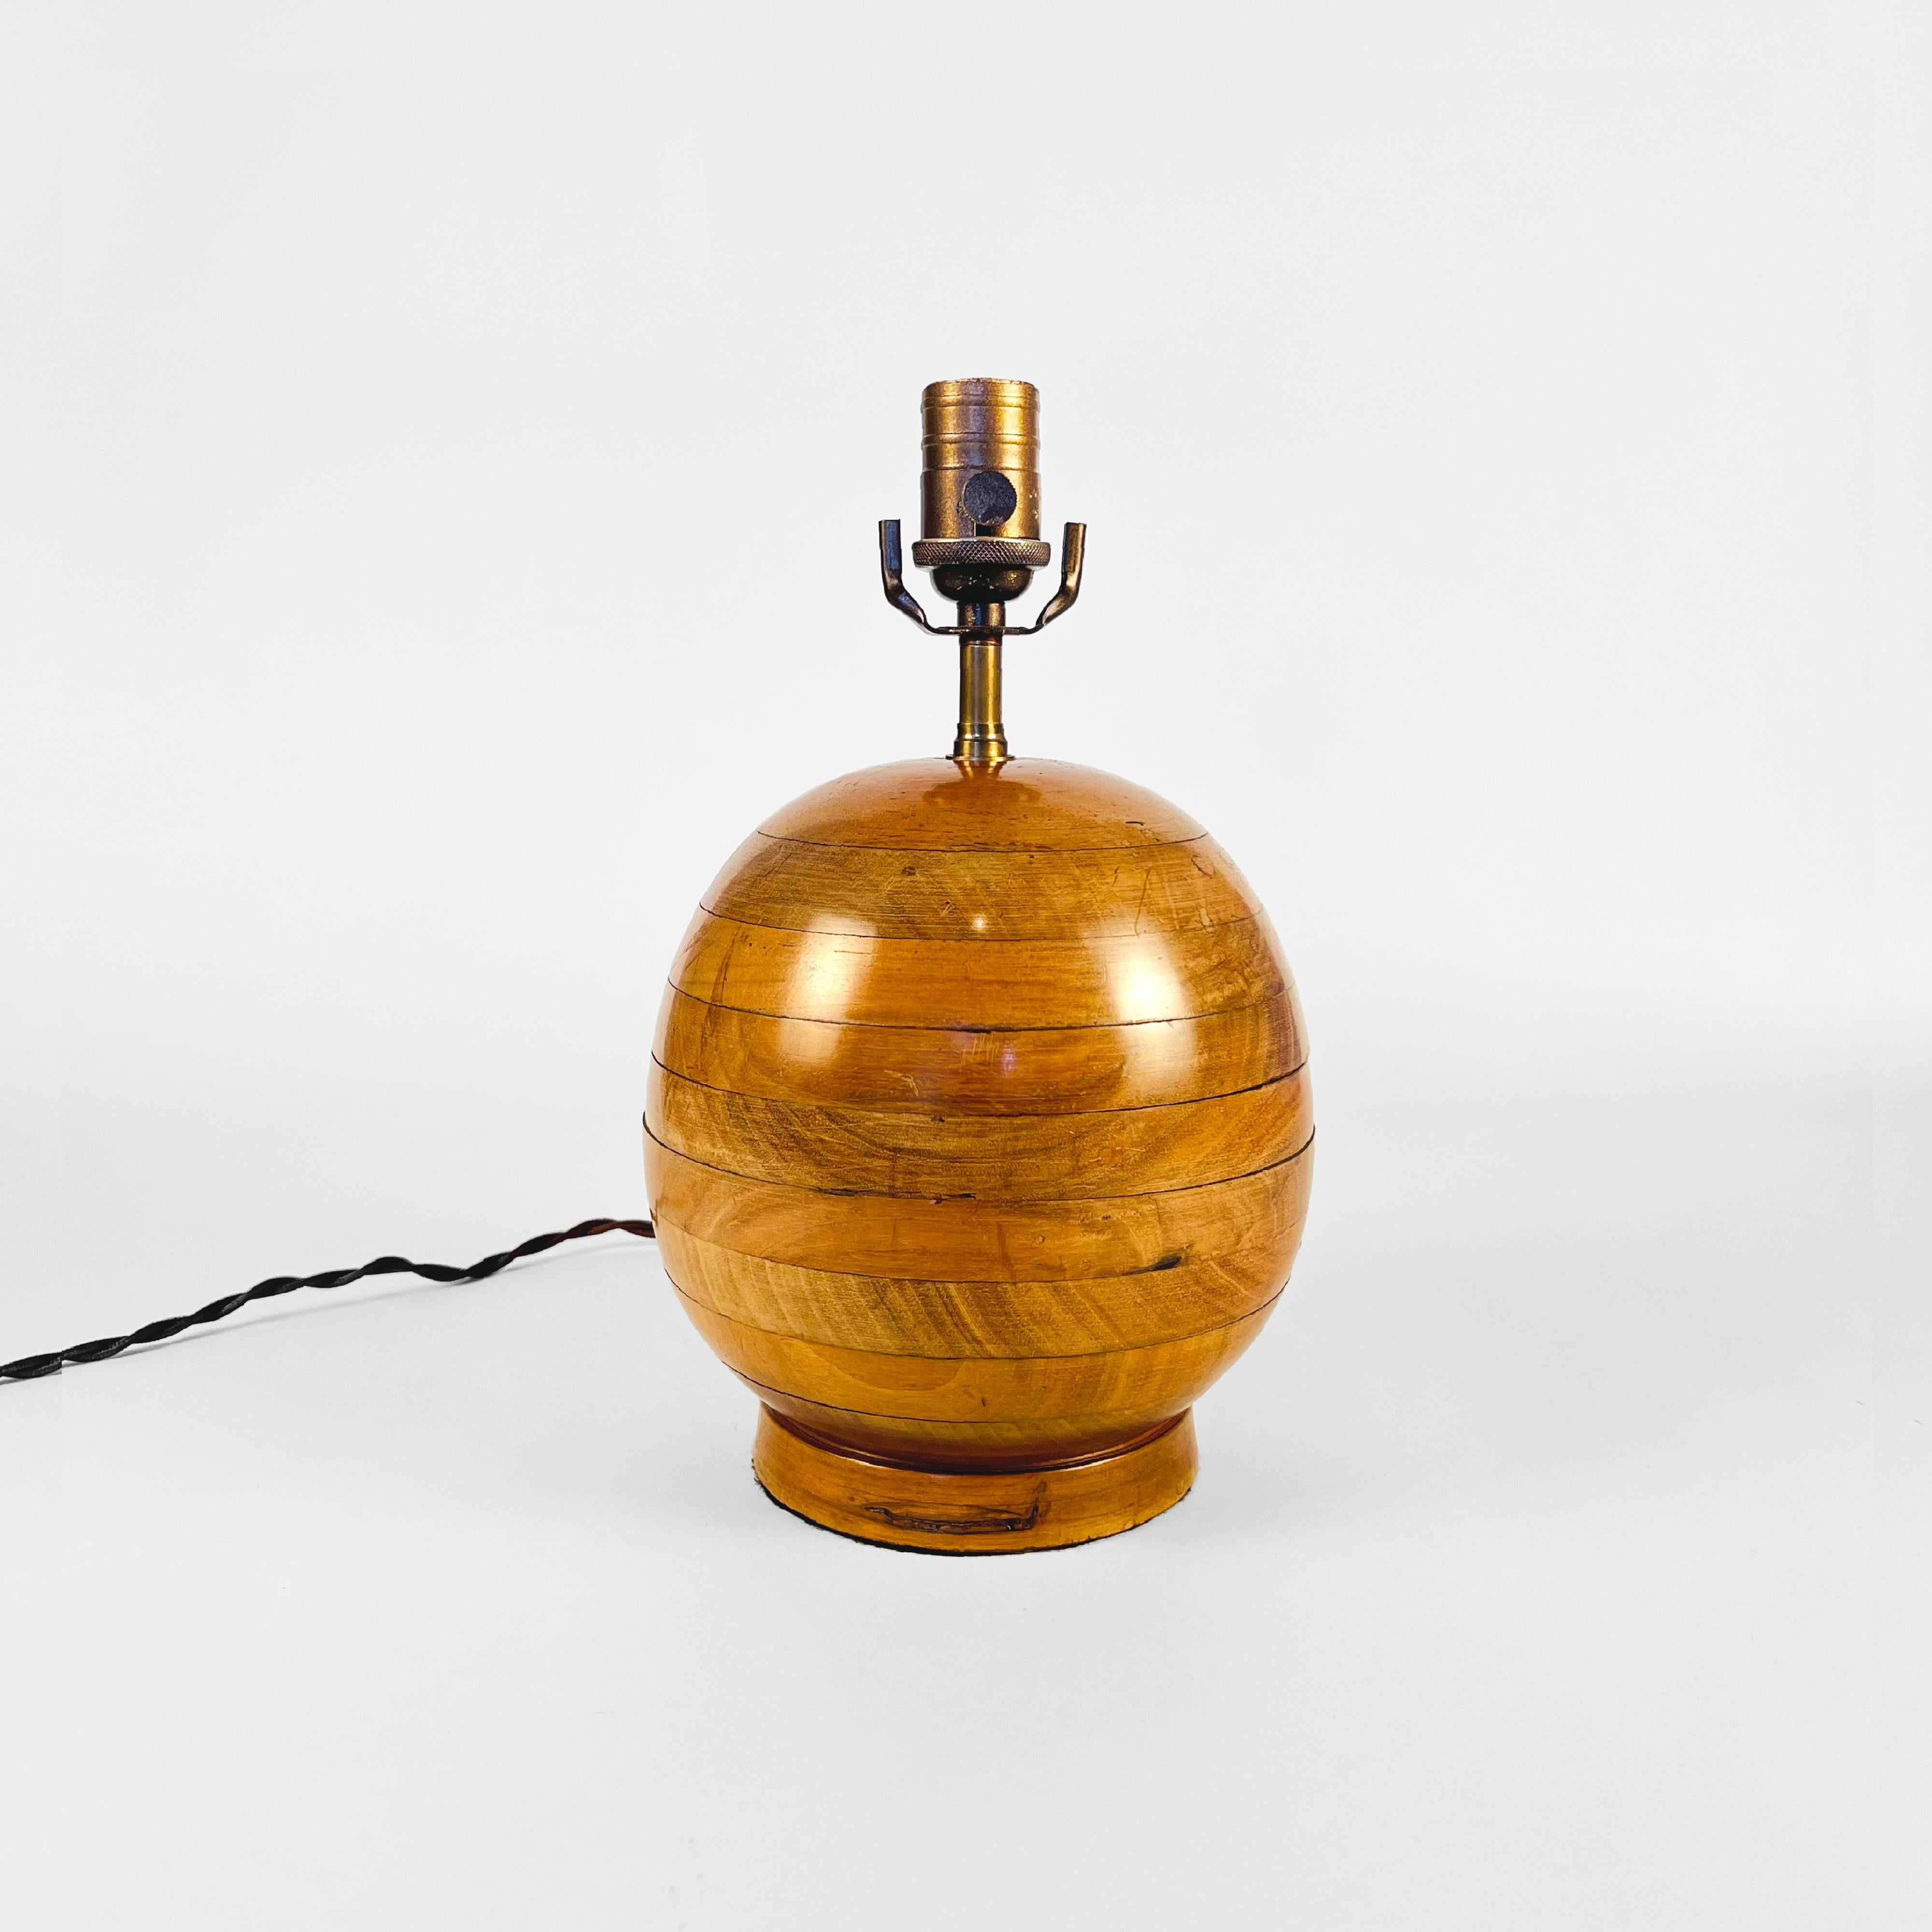 Art Deco round wooden table lamp, circa 1930.
The body is constructed with circular layers made of walnut, and sits on a round wooden base.
This item has been rewired with new hardware and braided cloth cord. This lamp does not include shade or harp.